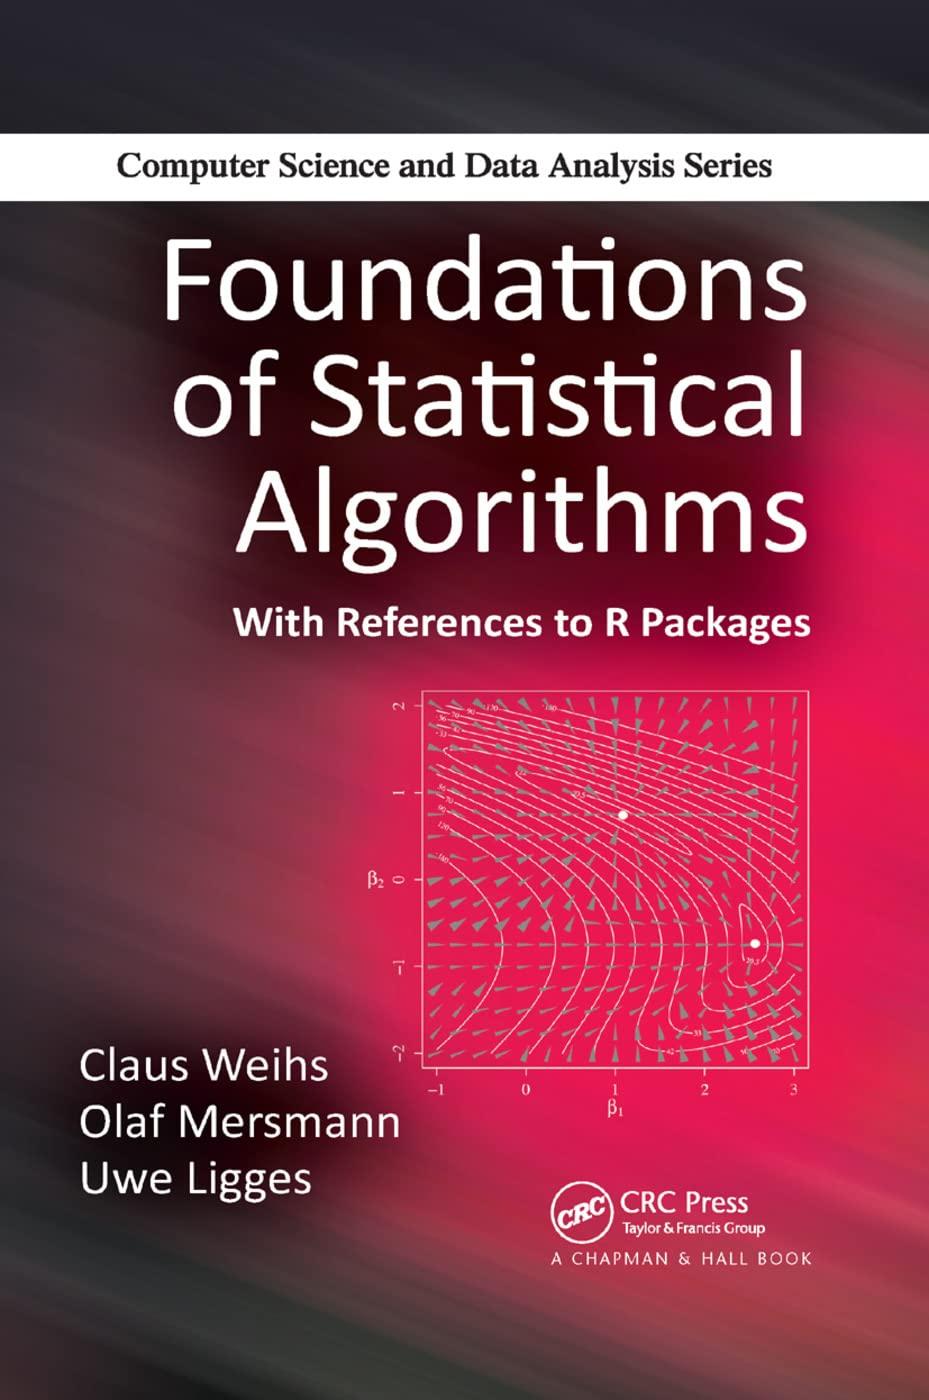 foundations of statistical algorithms with references to r packages 1st edition claus weihs, olaf mersmann,